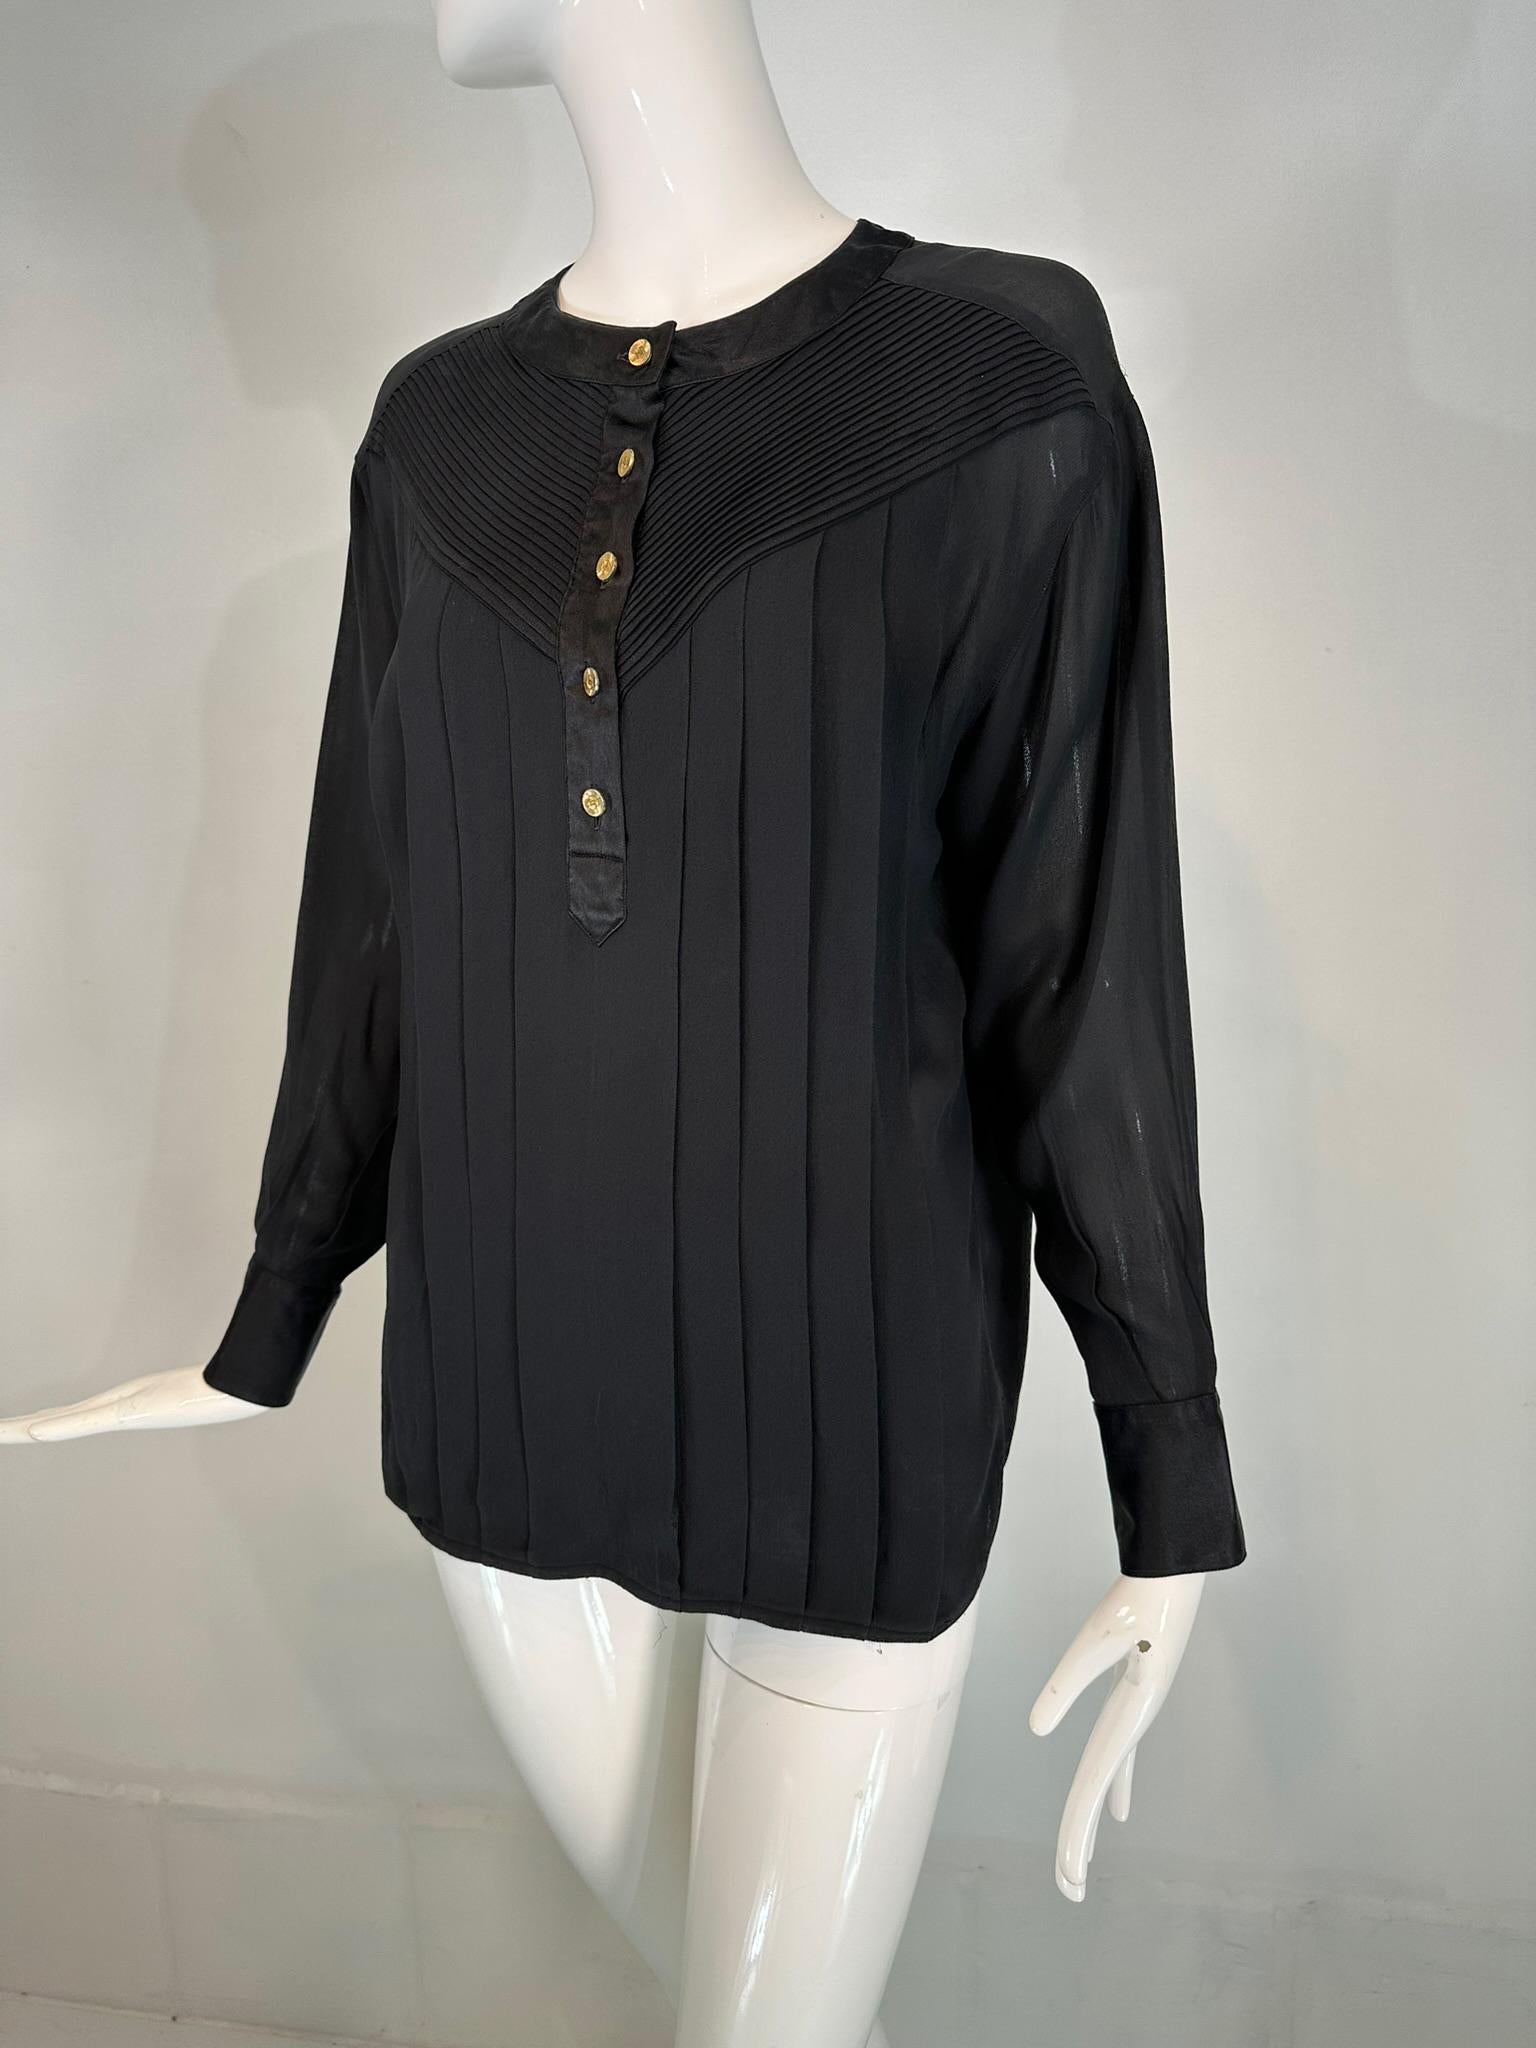 Chanel black silk chiffon & satin pleated long sleeve button front blouse. Beautiful Long sleeve sheer silk chiffon blouse with dropped shoulders, double button cuffs with gold Chanel logo buttons. The pull on blouse has a front satin button placket